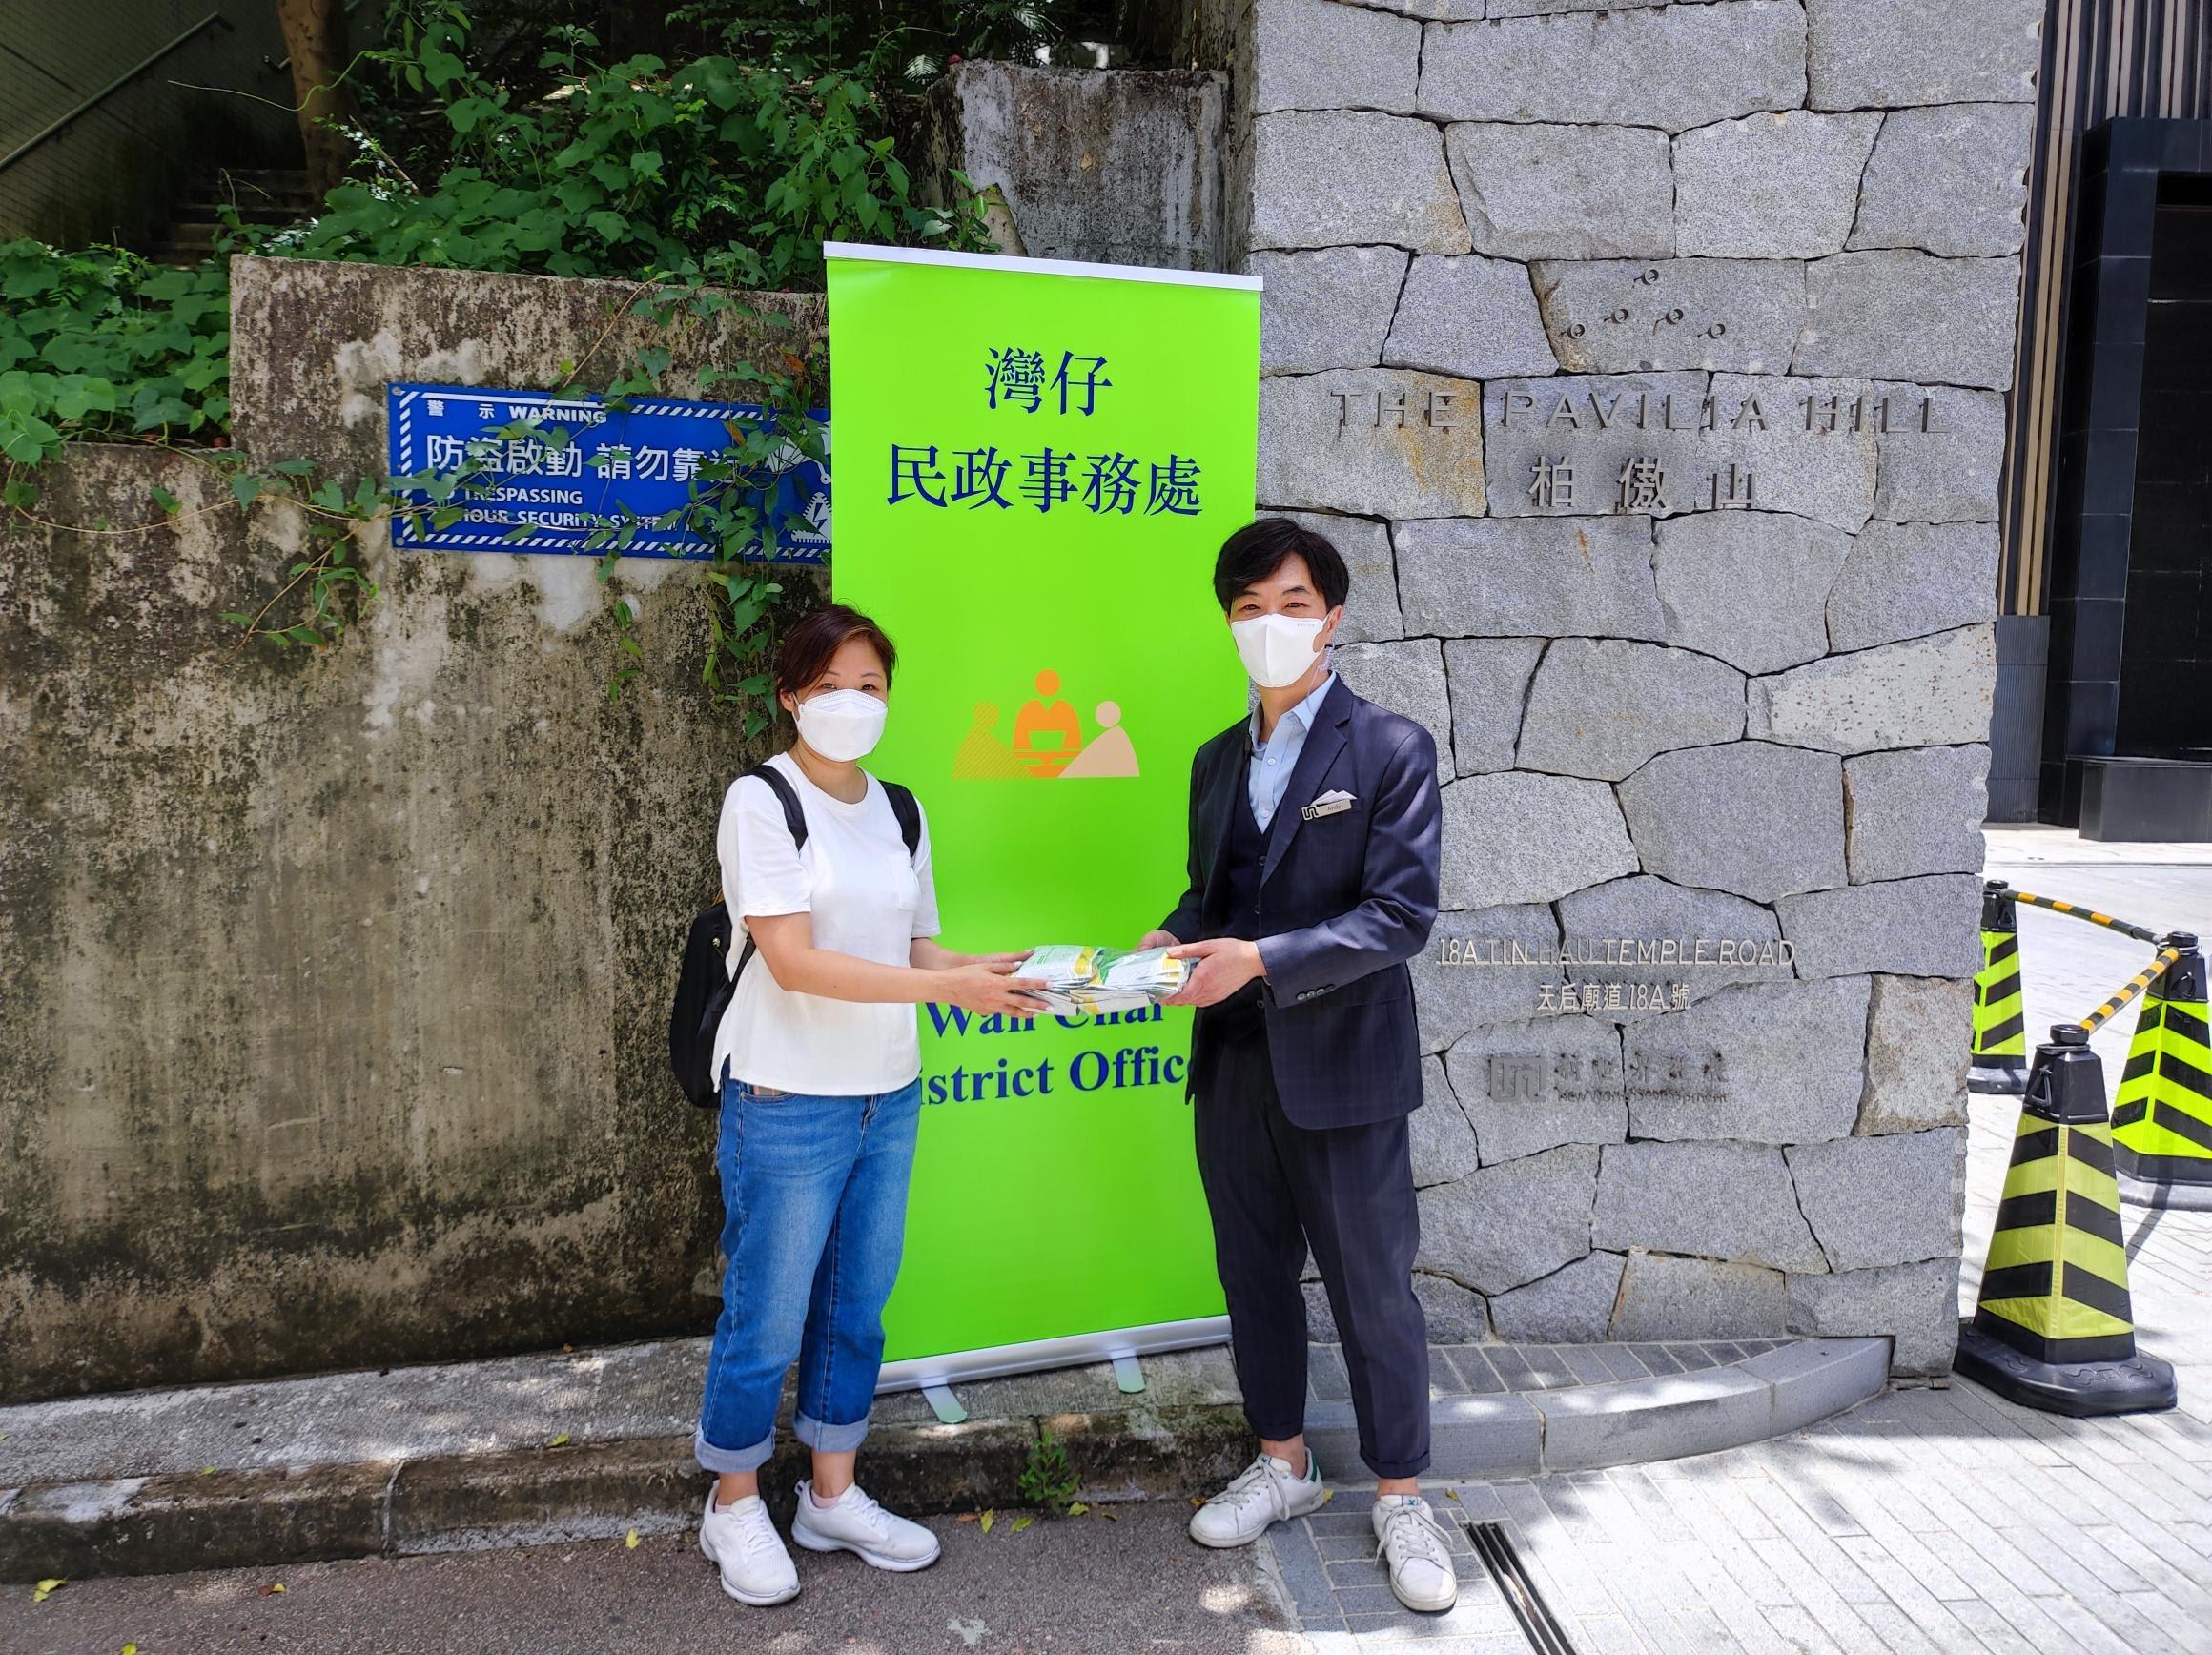 The Wan Chai District Office today (June 26) distributed COVID-19 rapid test kits to households, cleansing workers and property management staff living and working in The Pavilia Hill for voluntary testing through the property management company and the owners' corporation.